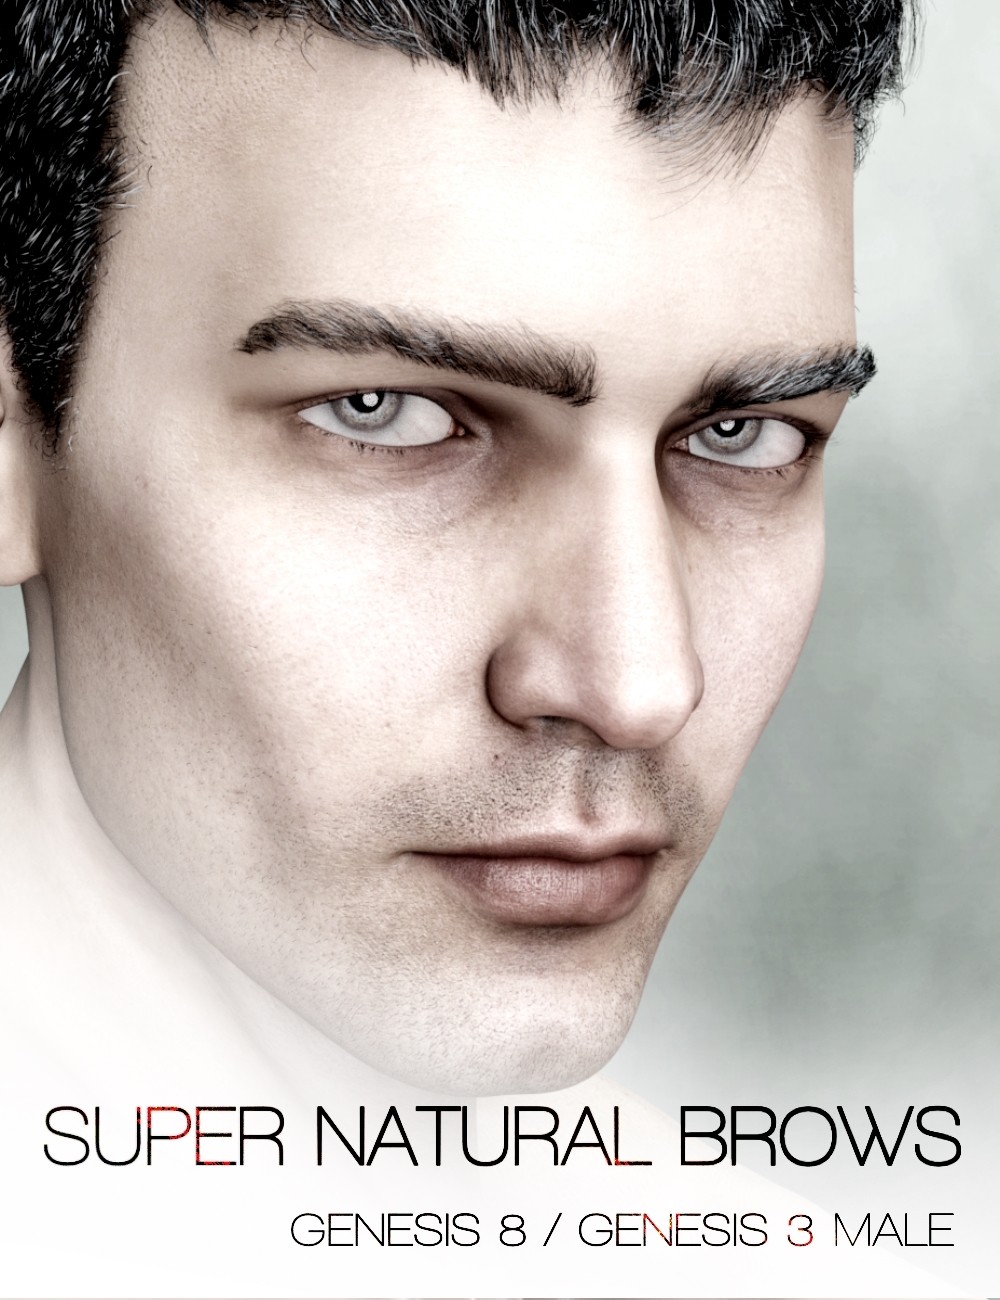 00 main super natural brows merchant resource for genesis 8 and 3 male daz3d289a0d7bcd4dd5df